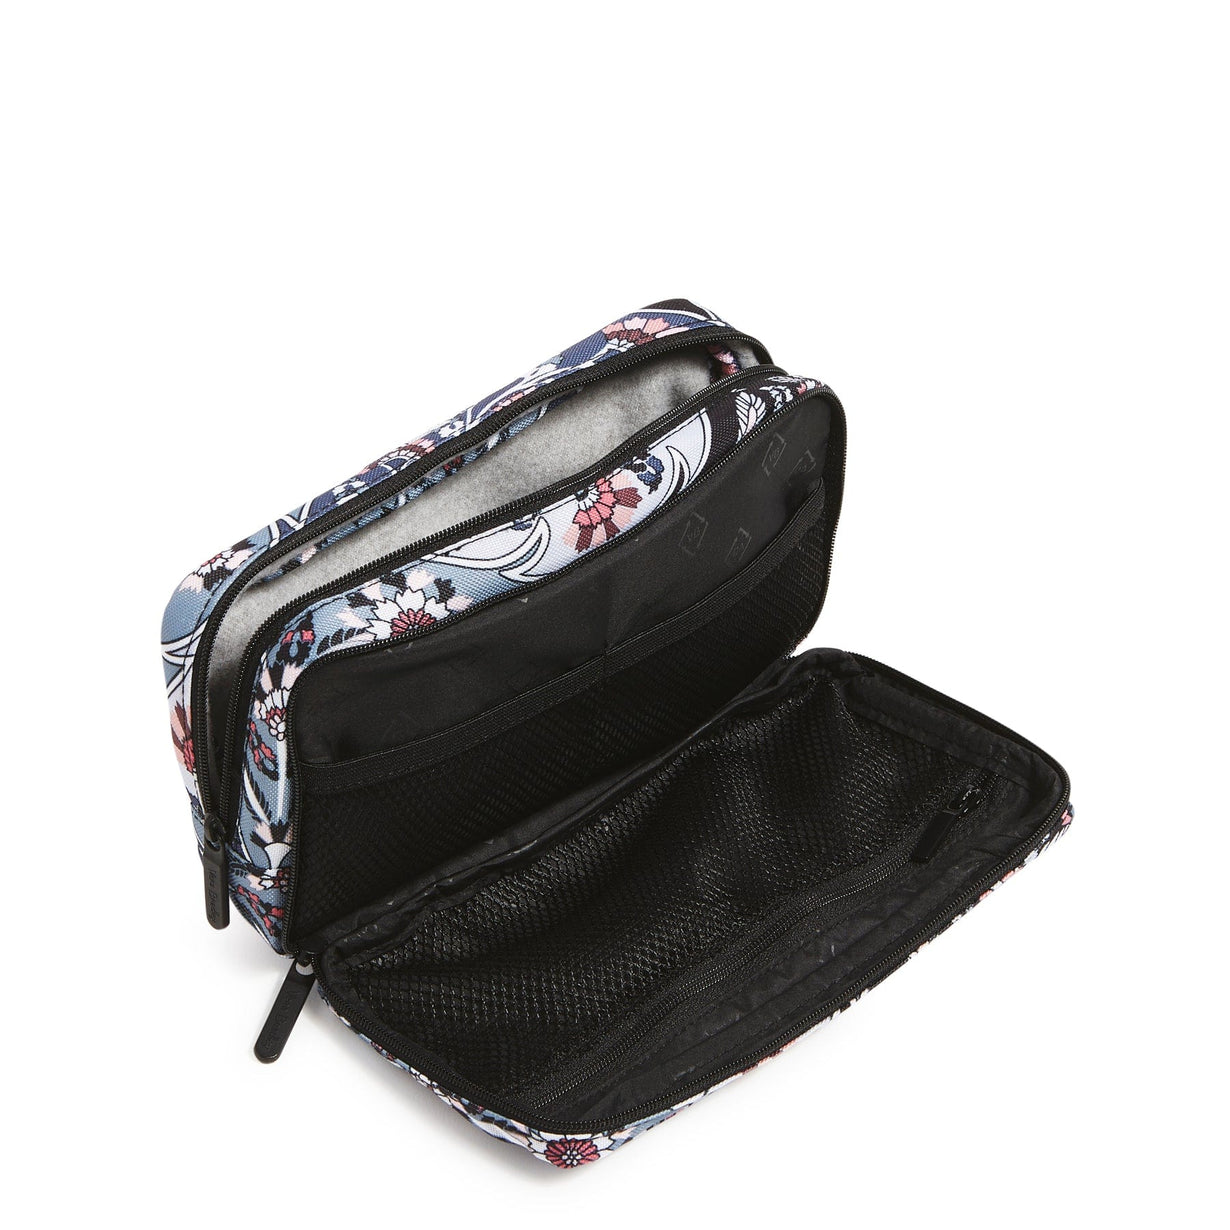 Vera Bradley Outlet: Take up to 70% off select styles - Clark Deals